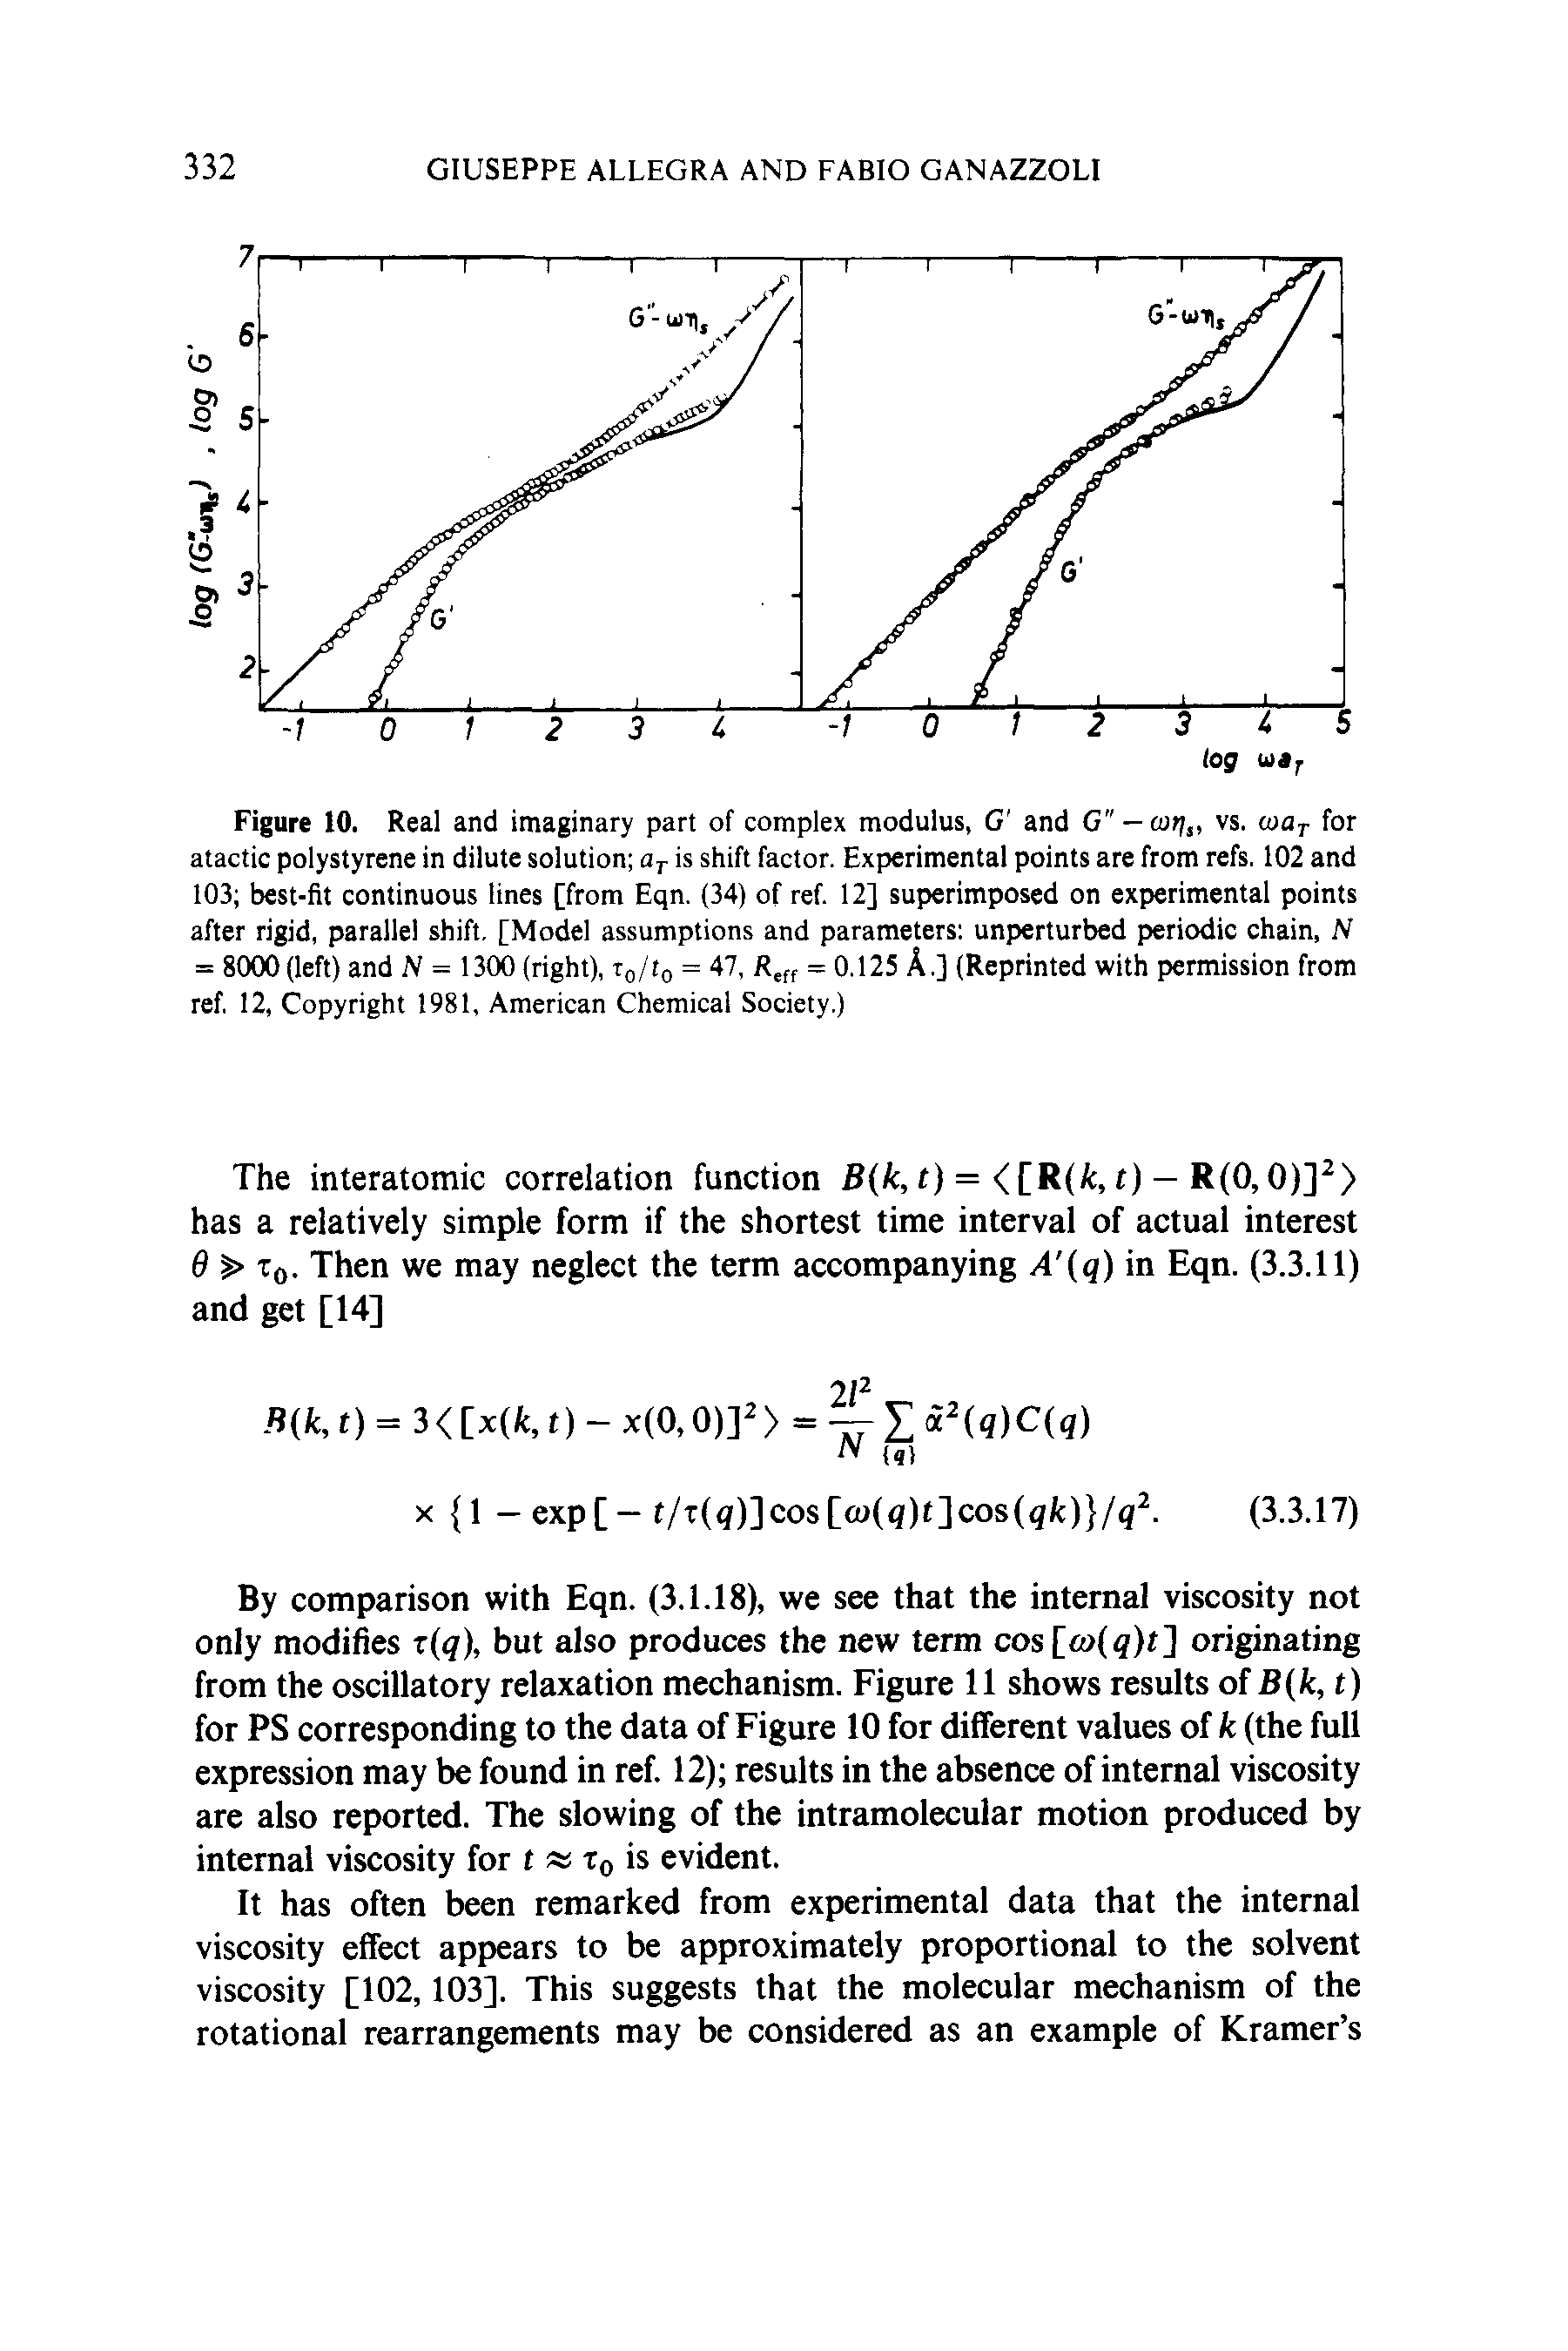 Figure 10. Real and imaginary part of complex modulus, G and G —cut/j, vs. loor for atactic polystyrene in dilute solution Oj- is shift factor. Experimental points are from refs. 102 and 103 best-fit continuous lines [from Eqn. (34) of ref. 12] superimposed on experimental points after rigid, parallel shift. [Model assumptions and parameters unperturbed periodic chain, N = 8000 (left) and N = 1300 (right), to/to = 47, R ff = 0.125 A.] (Reprinted with permission from ref. 12, Copyright 1981, American Chemical Society.)...